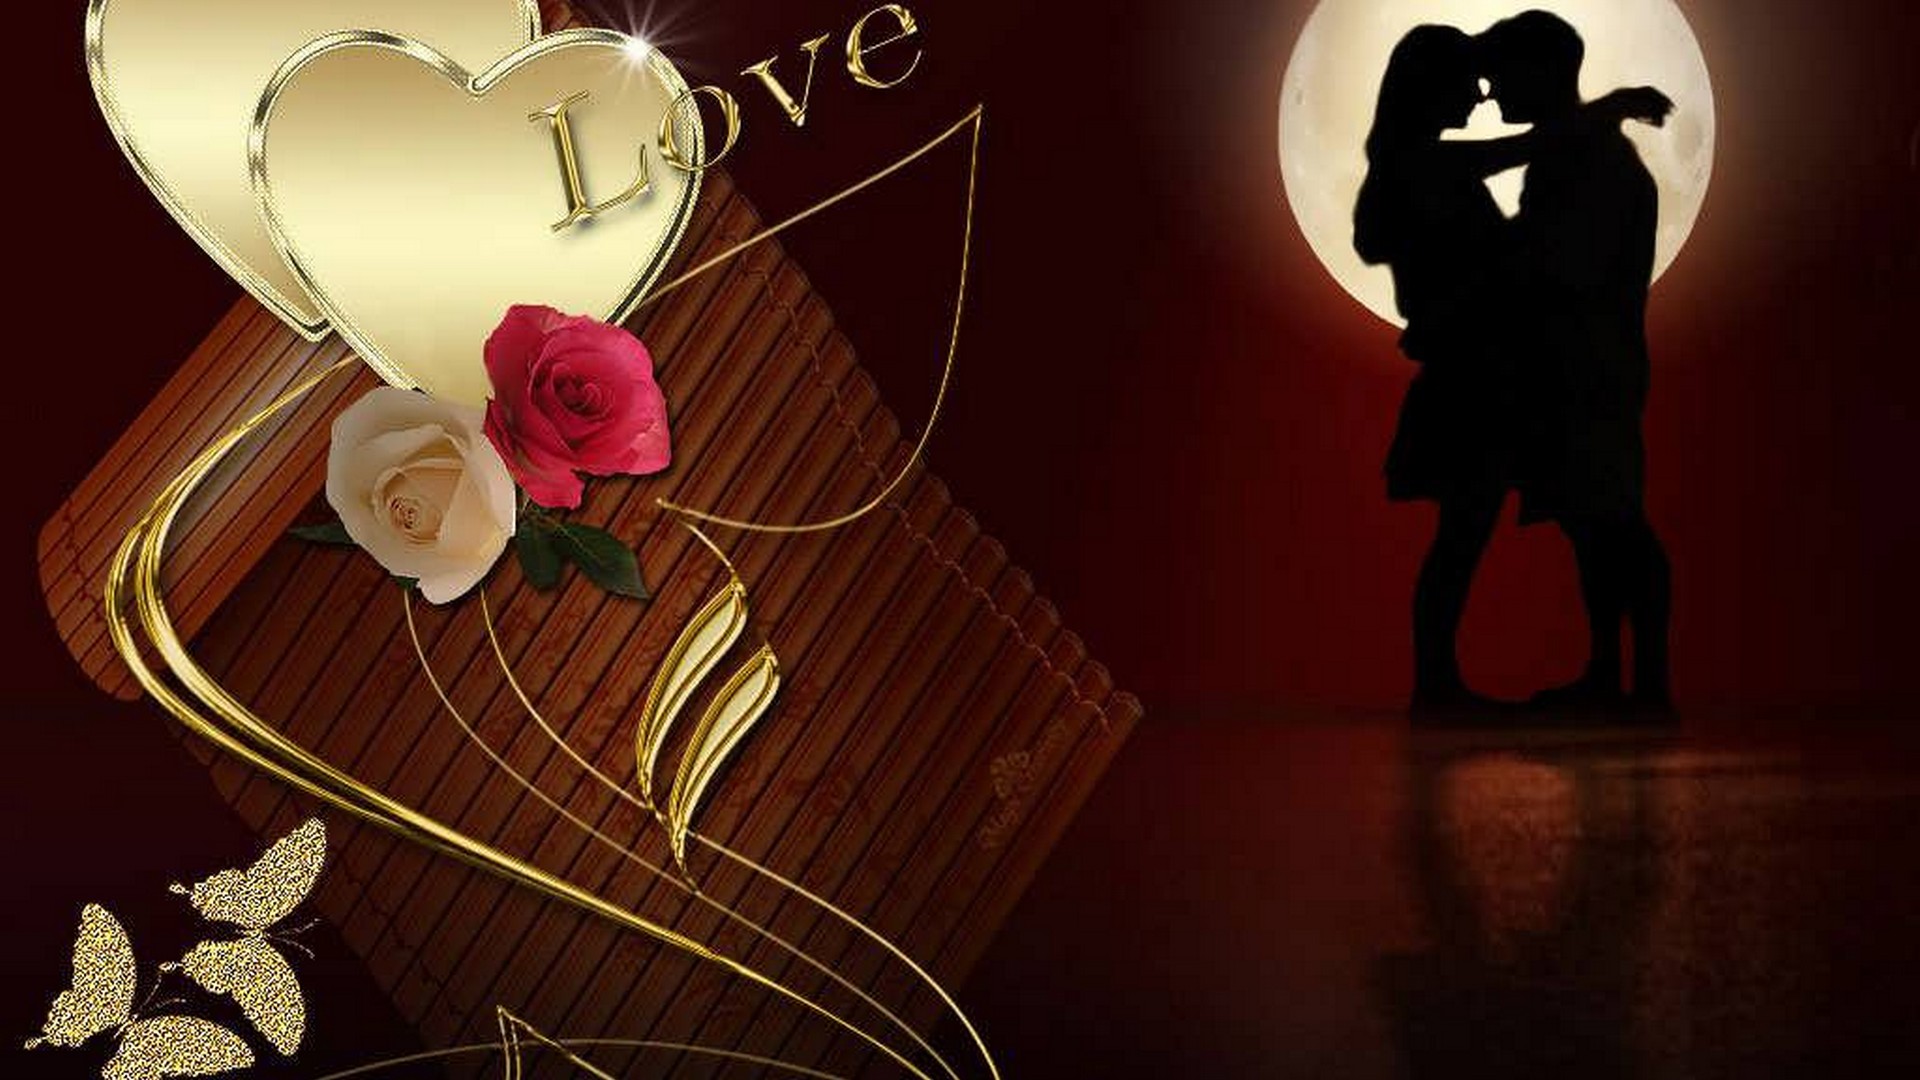 Romantic Valentine Day Wallpaper Hd - Love Valentine Images Of Couples - HD Wallpaper 